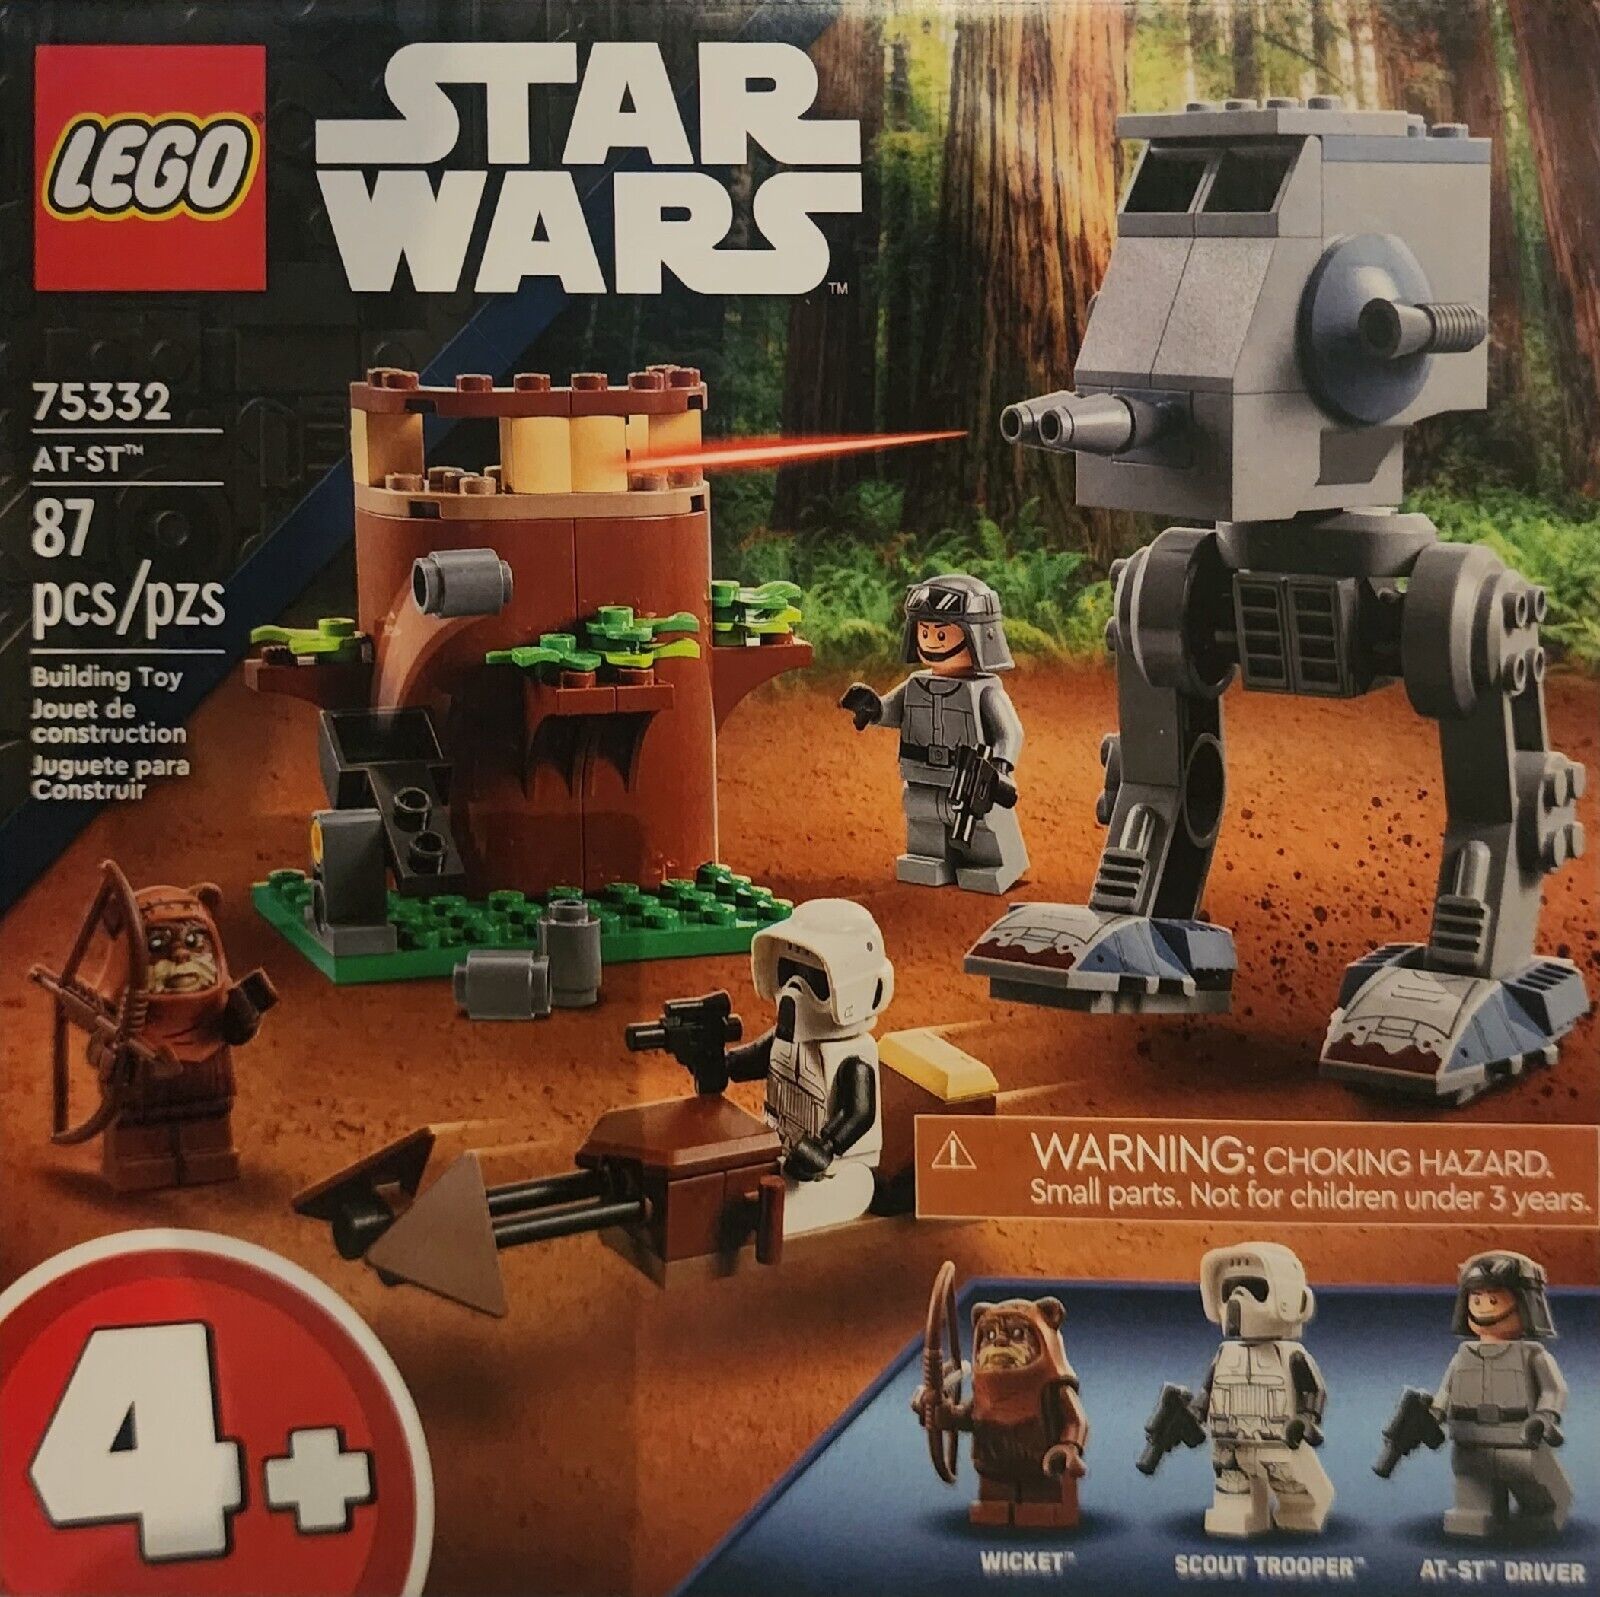 LEGO Star Wars at-ST 75332 Building Kit 87 Pieces Brand New In Sealed Box